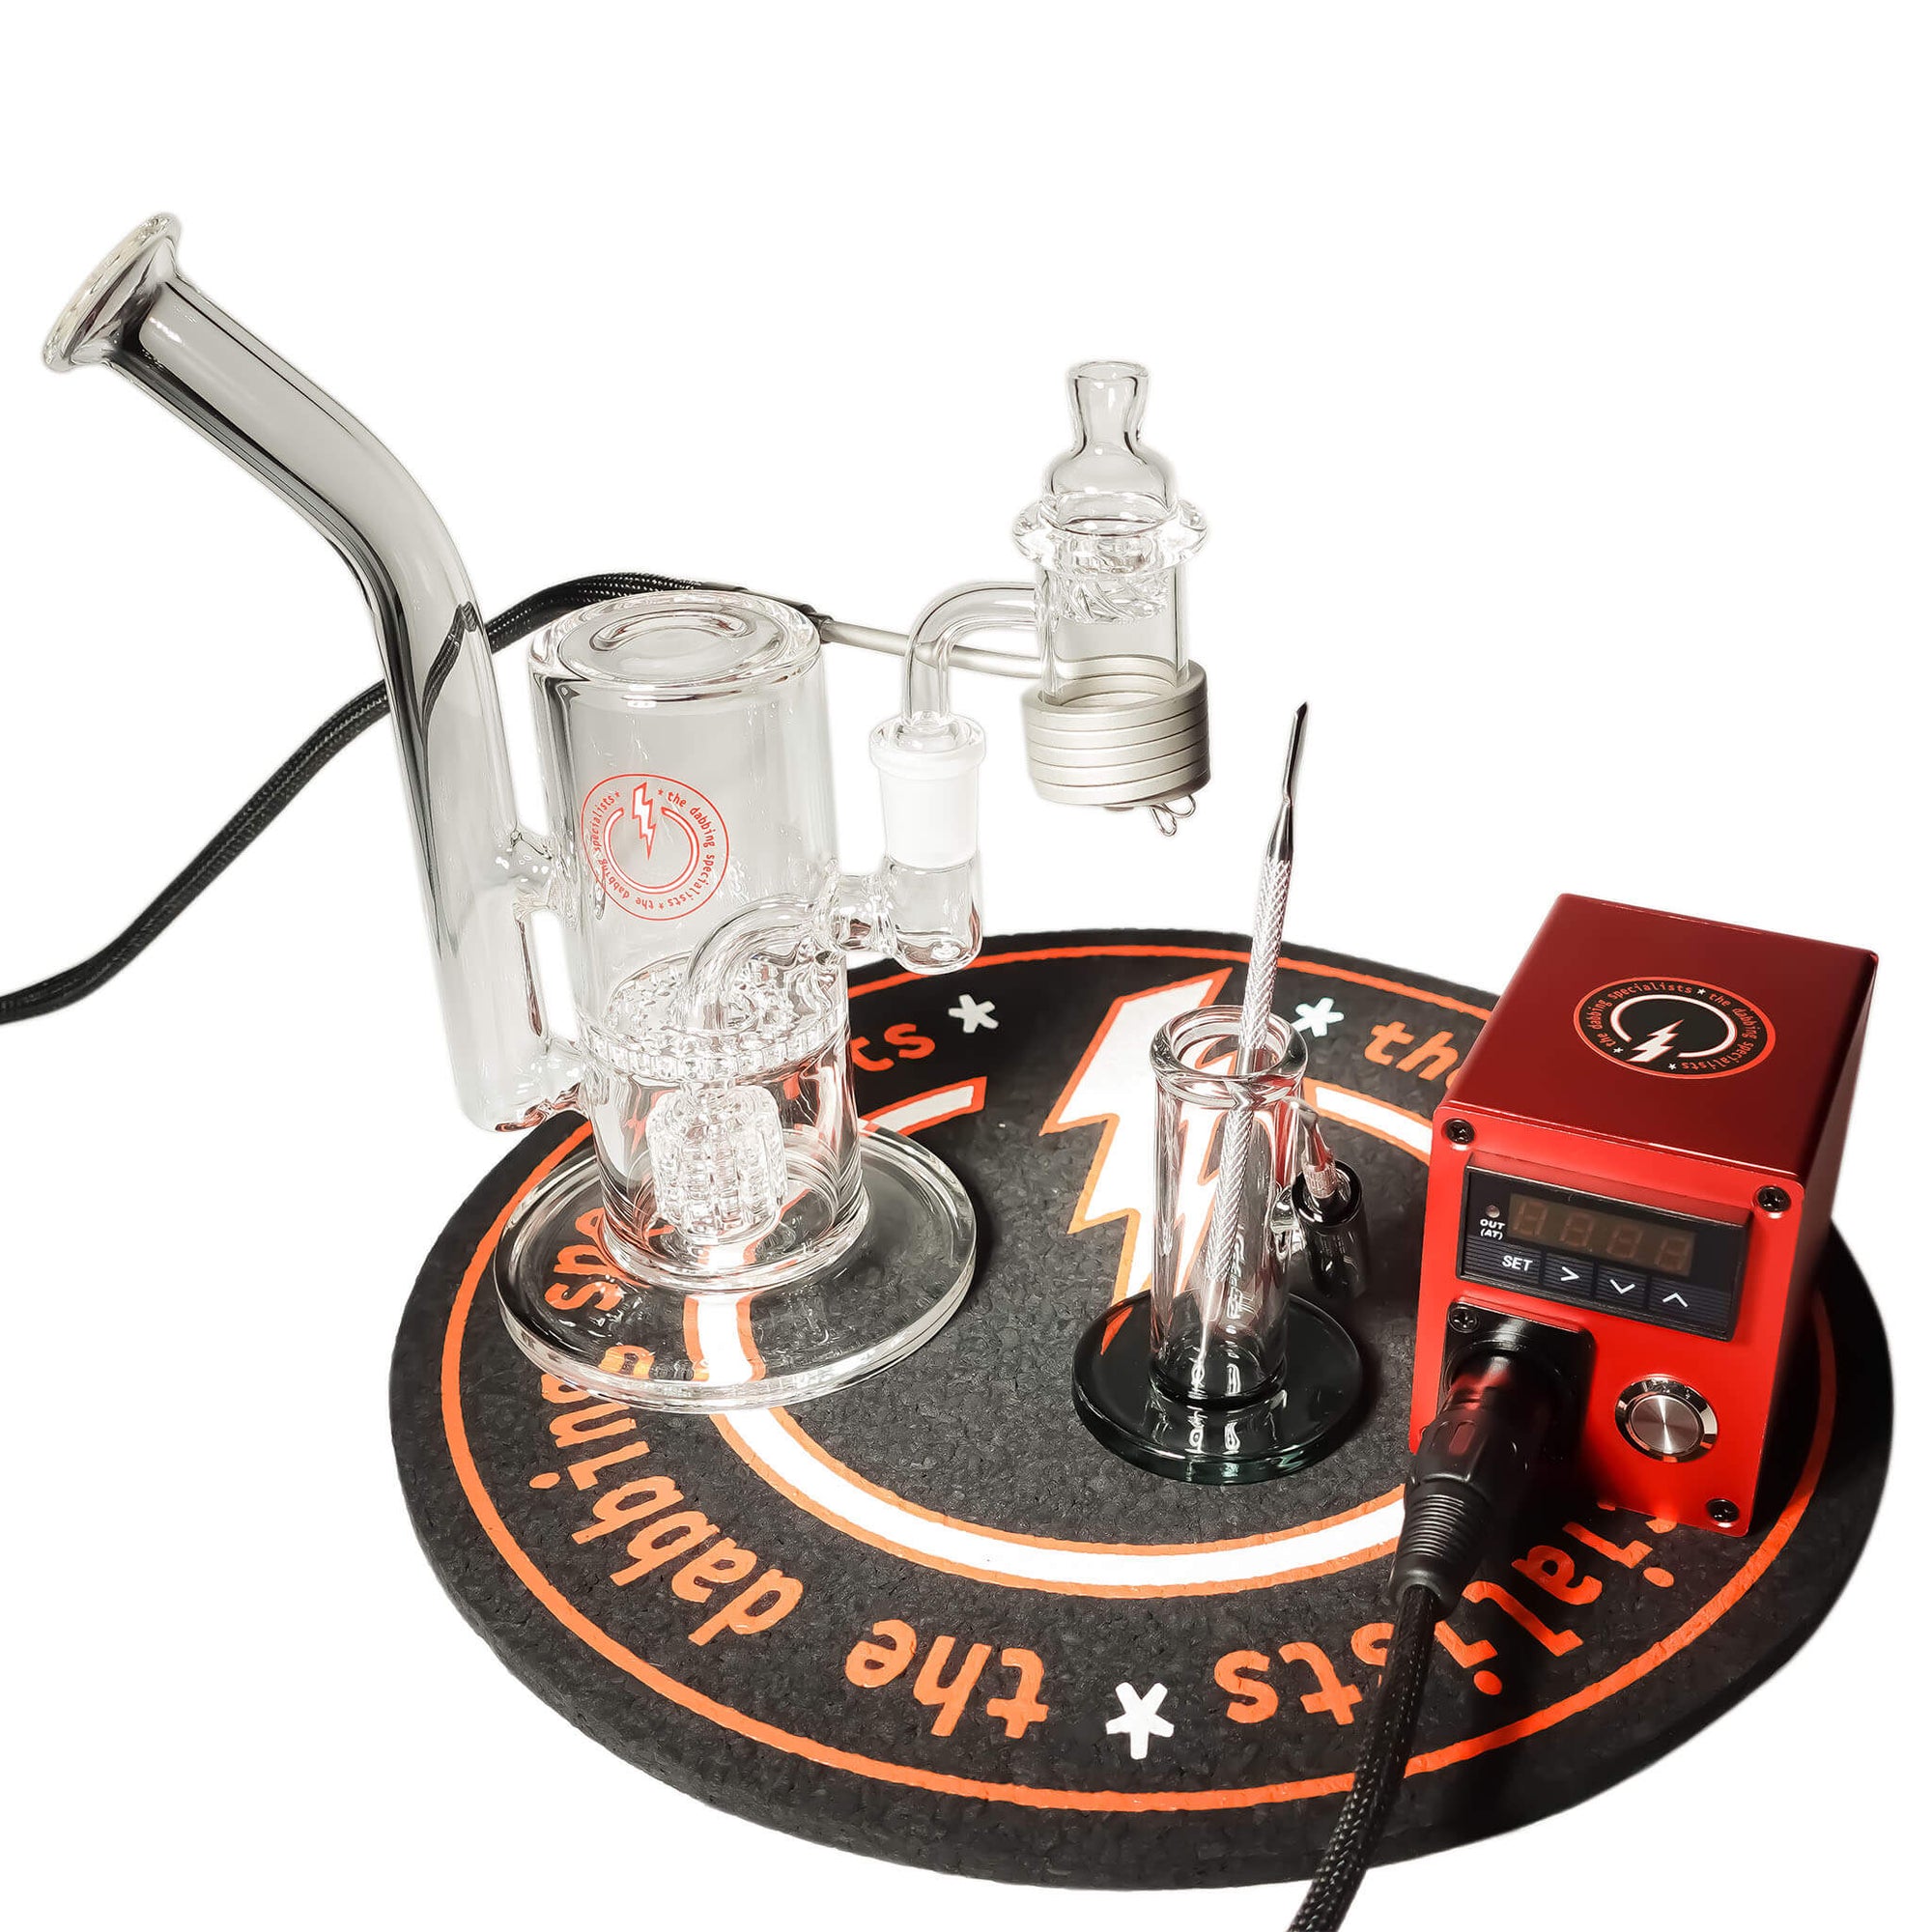 Reborn 25mm E-Banger Deluxe Enail Kit | Red Kit View | the dabbing specialists